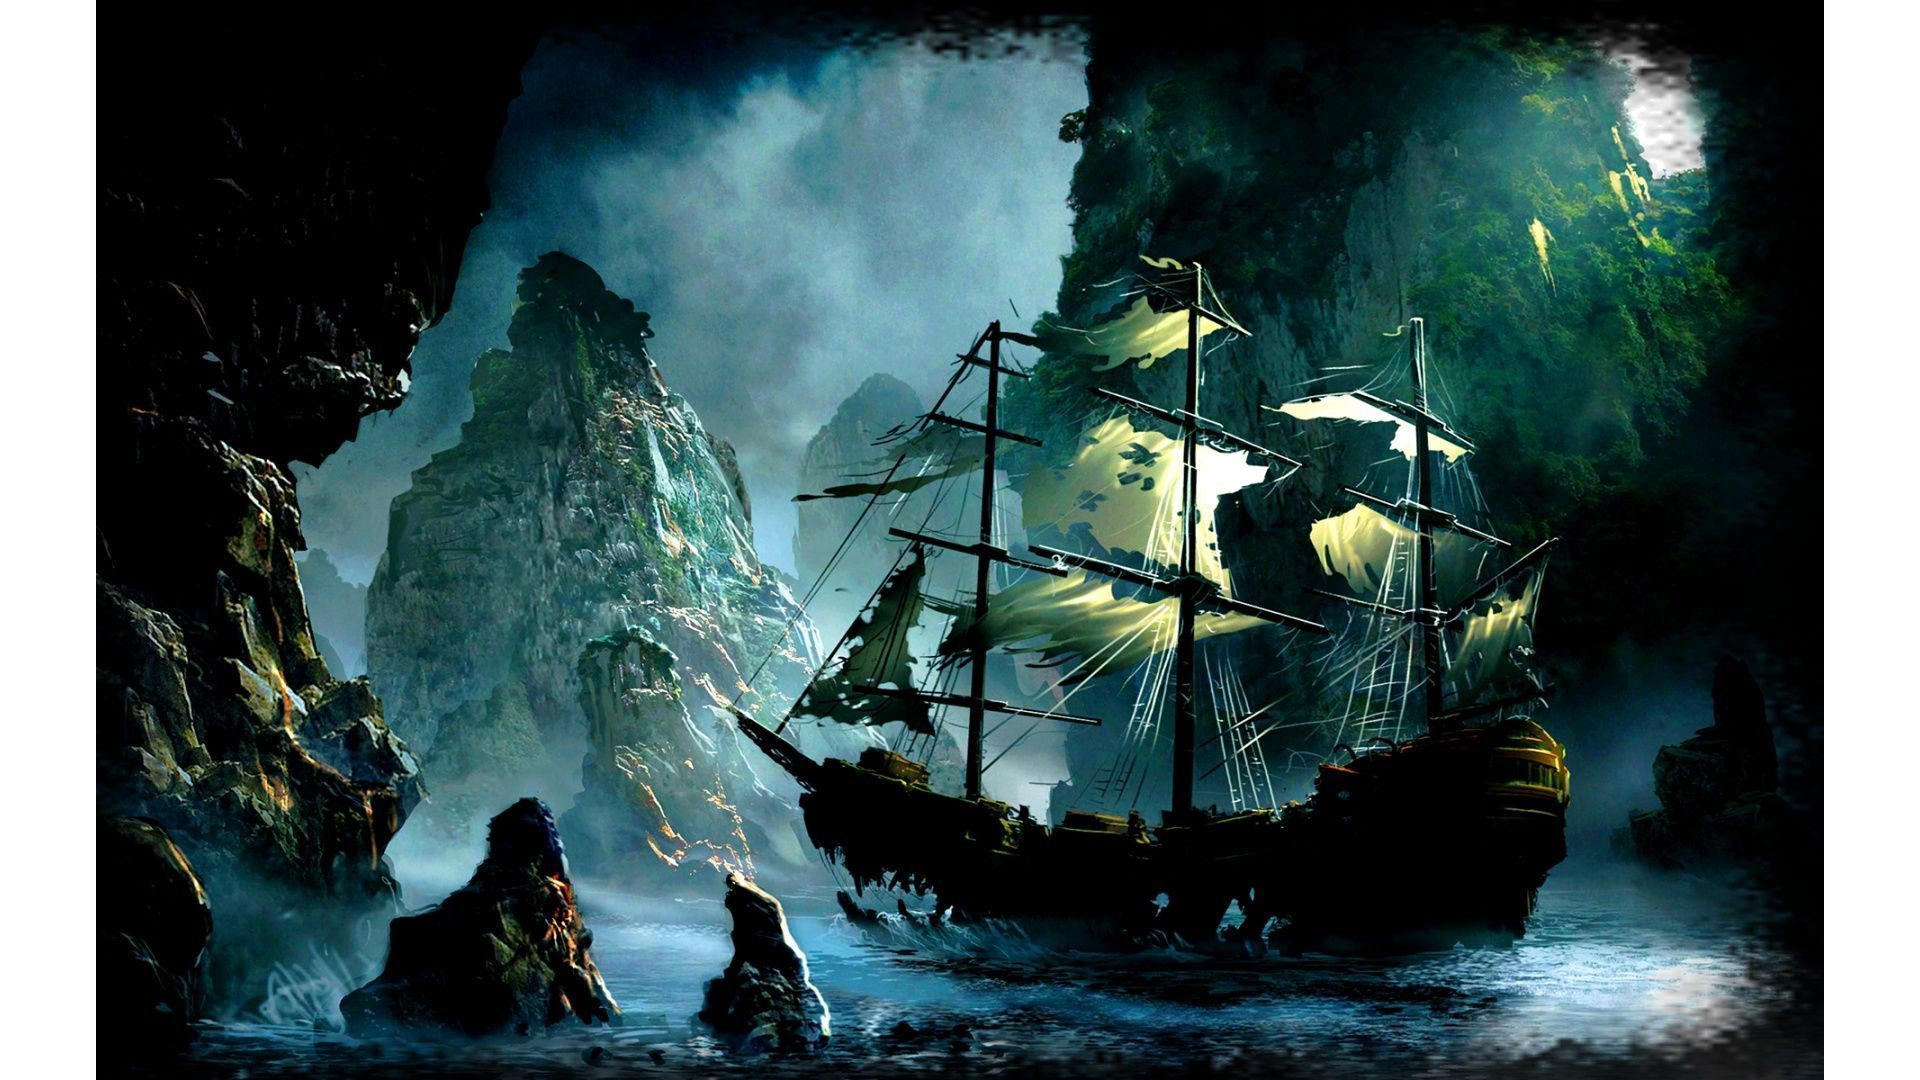 A painting of an old ship in the water - Pirate